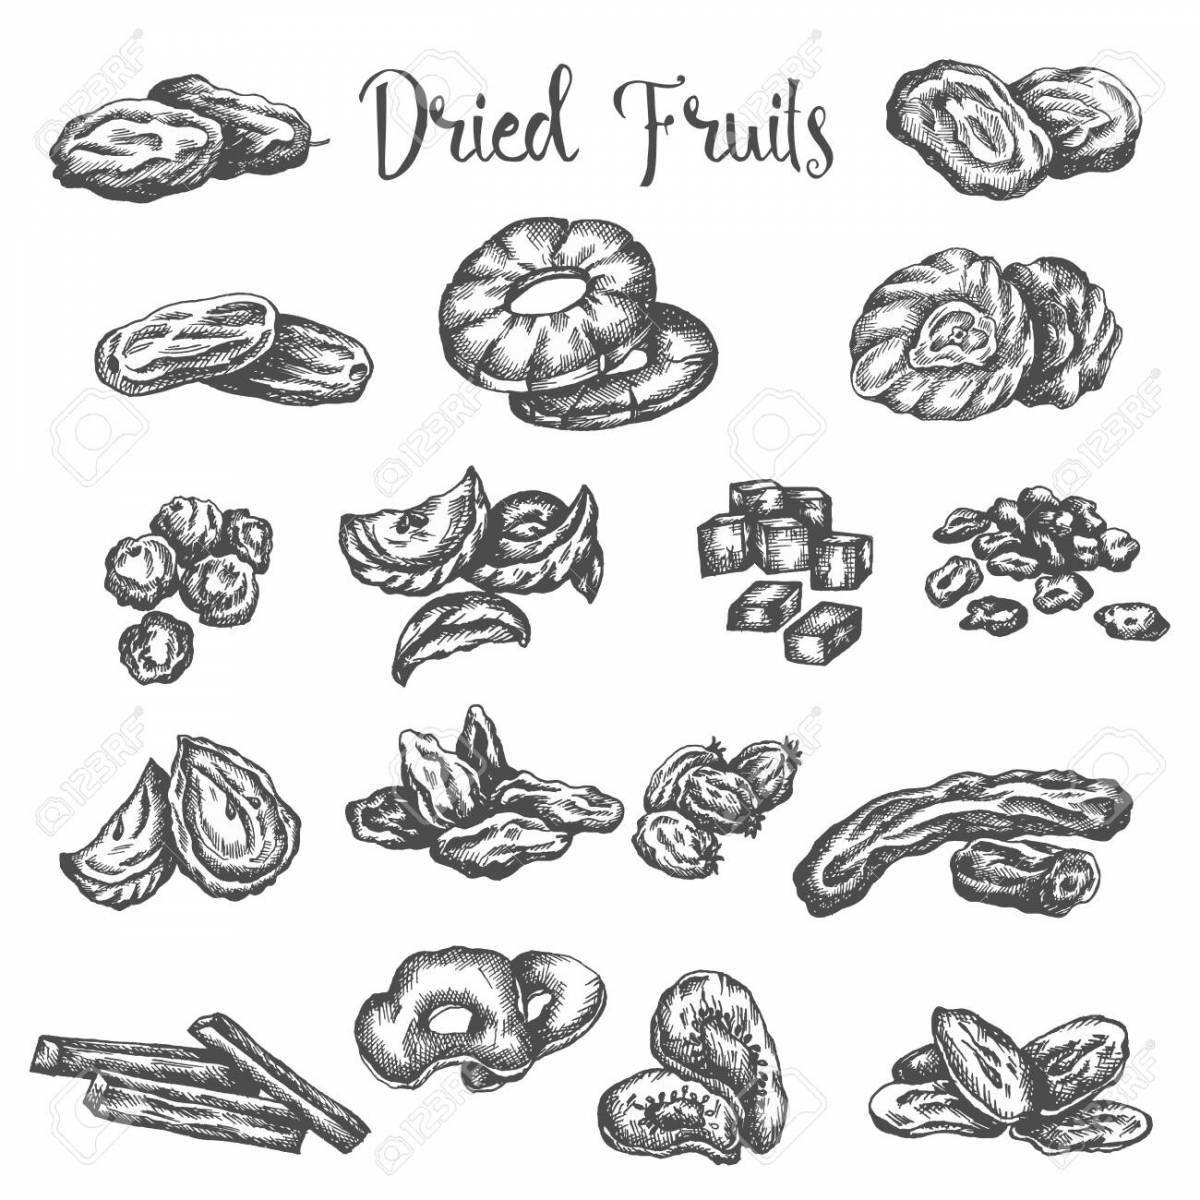 Color glowing dried fruit coloring page